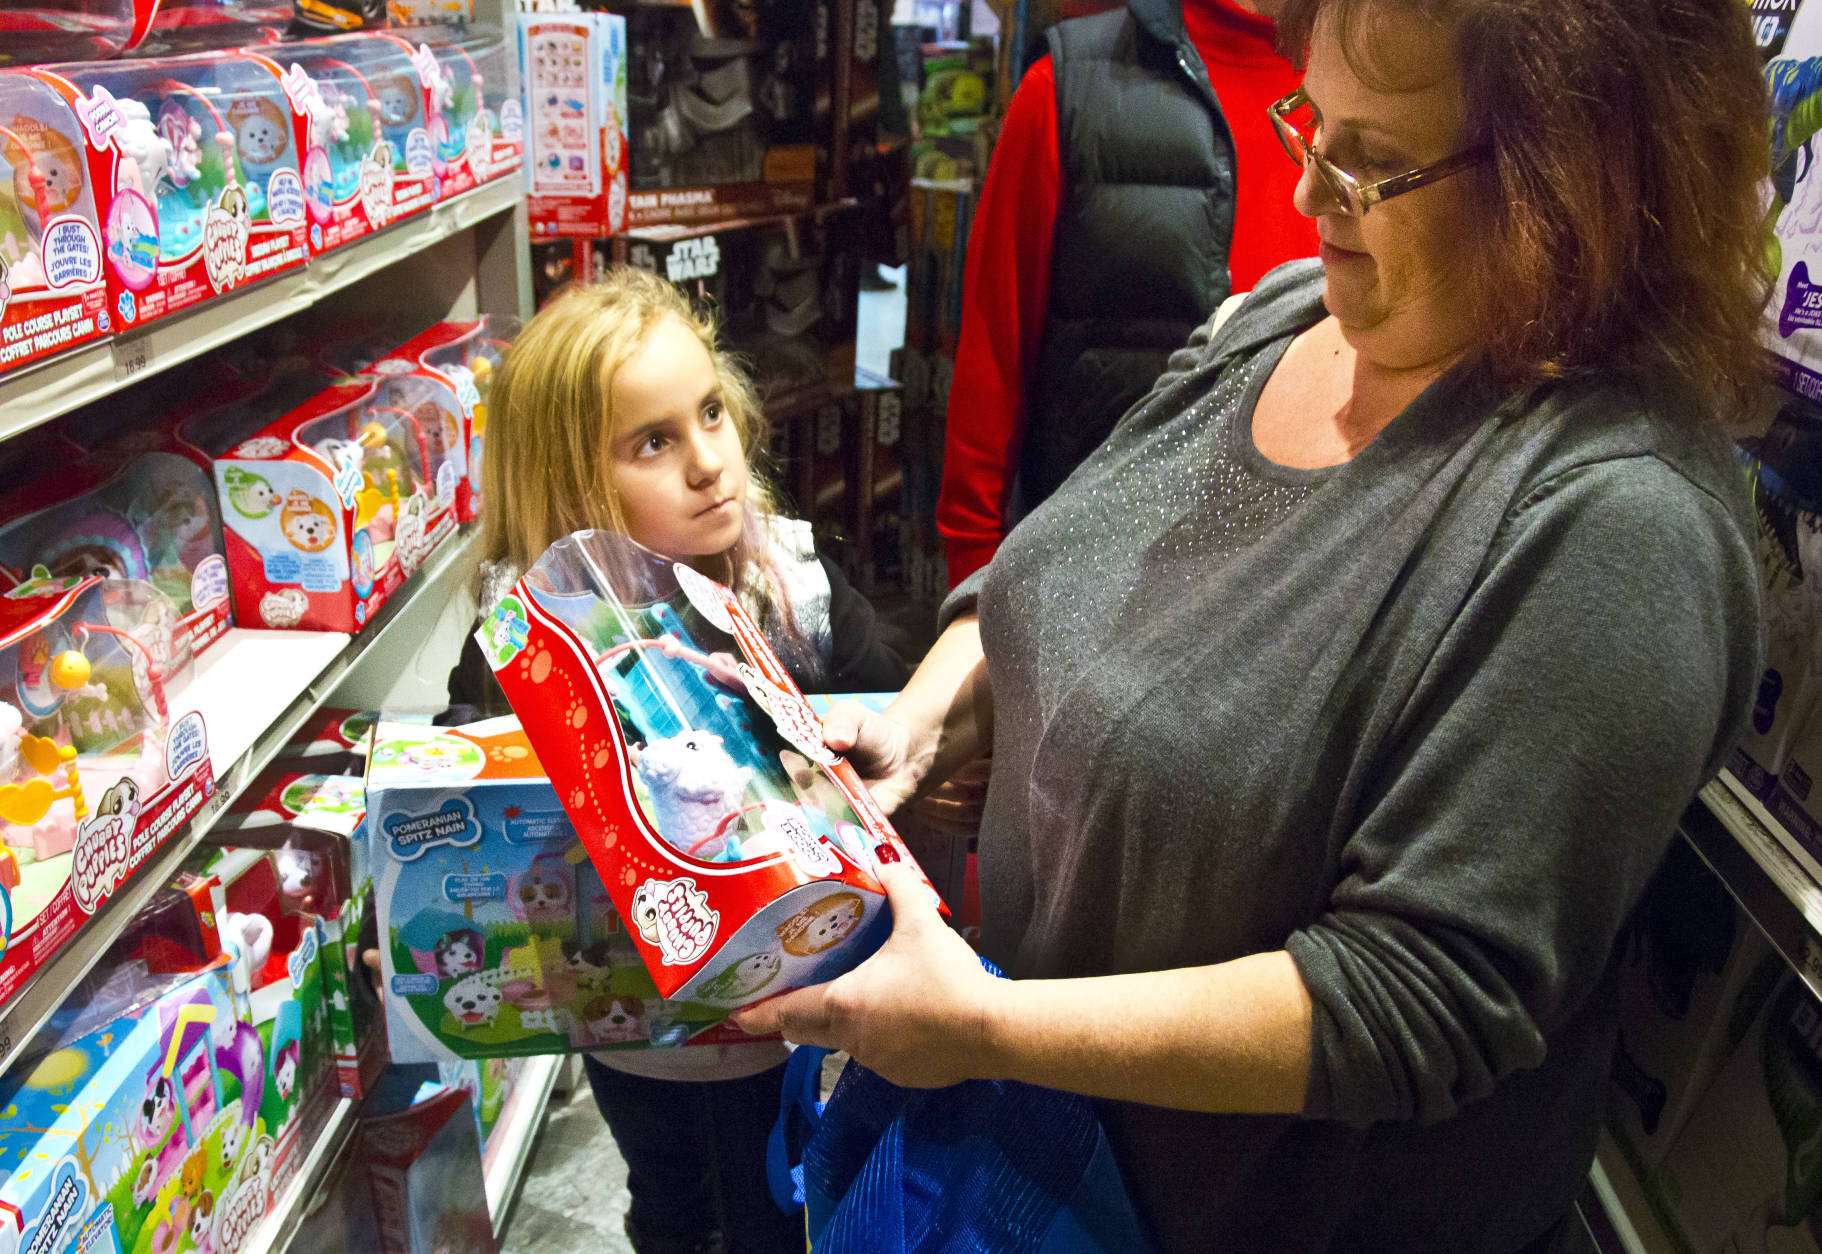 FILE - In this Friday, Nov. 27, 2015, file photo, Cinnamon Boffa, right, from Bensalem, Pa., checks out a "Chubby Puppies" toy for her daughter Serenity, left, at a Toys R Us, in New York. Toys R Us said Wednesday, Sept. 14, 2016, it has begun taking applications for part-time seasonal jobs in stores and distribution centers. A spokeswoman declined to give a nationwide figure but said the retailer expects to add at least 10,900 workers in five of its biggest markets: New York, Los Angeles, Philadelphia, Chicago and Washington. (AP Photo/Bebeto Matthews, File)